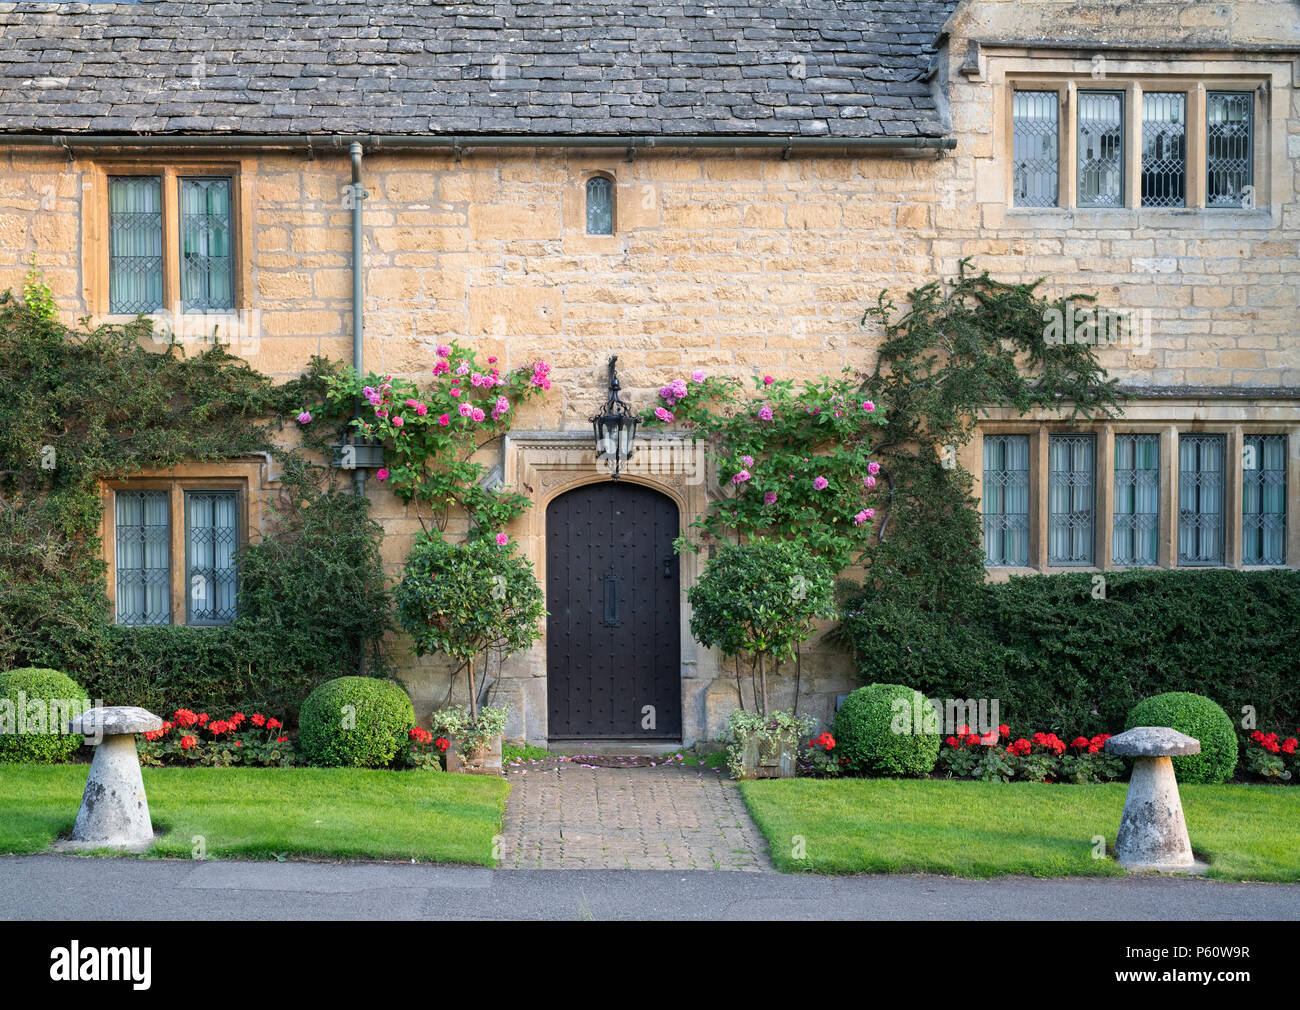 Cotswold stone house in estate. Broadway, Cotswolds, Worcestershire, Inghilterra Foto Stock